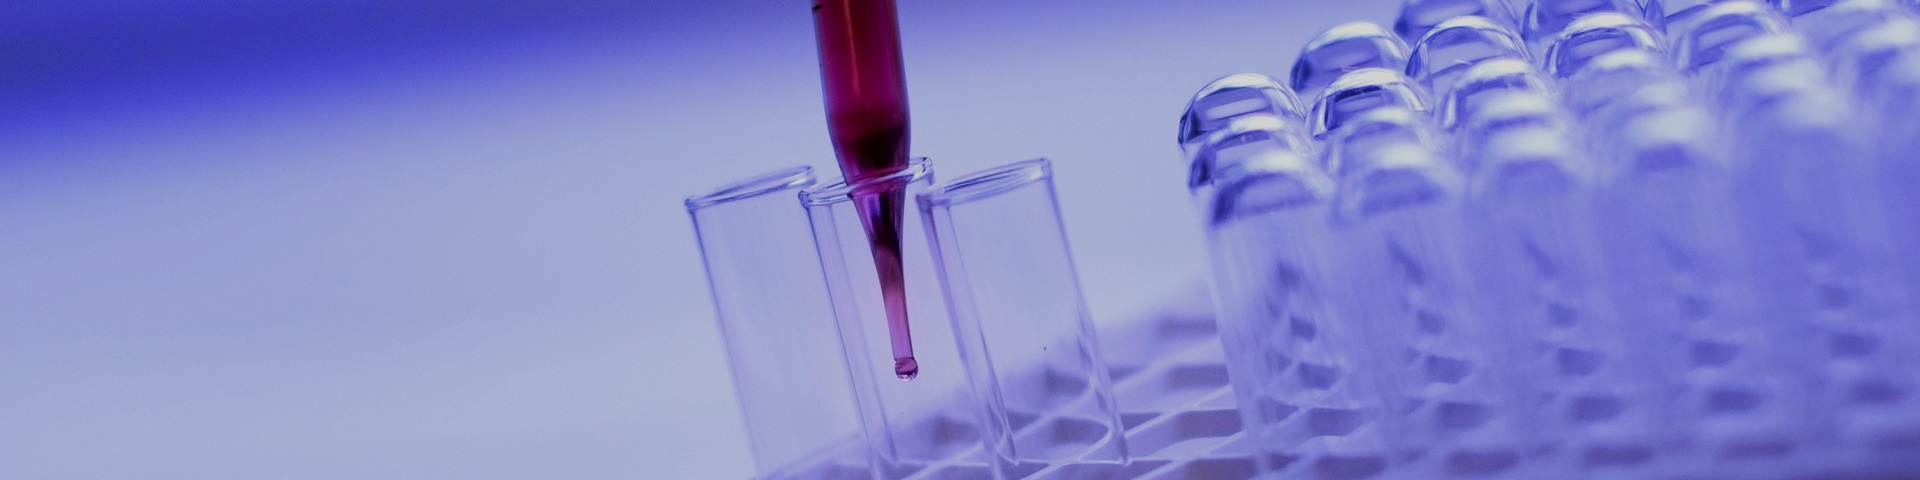 Stem Cell Research Conducted without Funds from Catholic Investment Portfolio